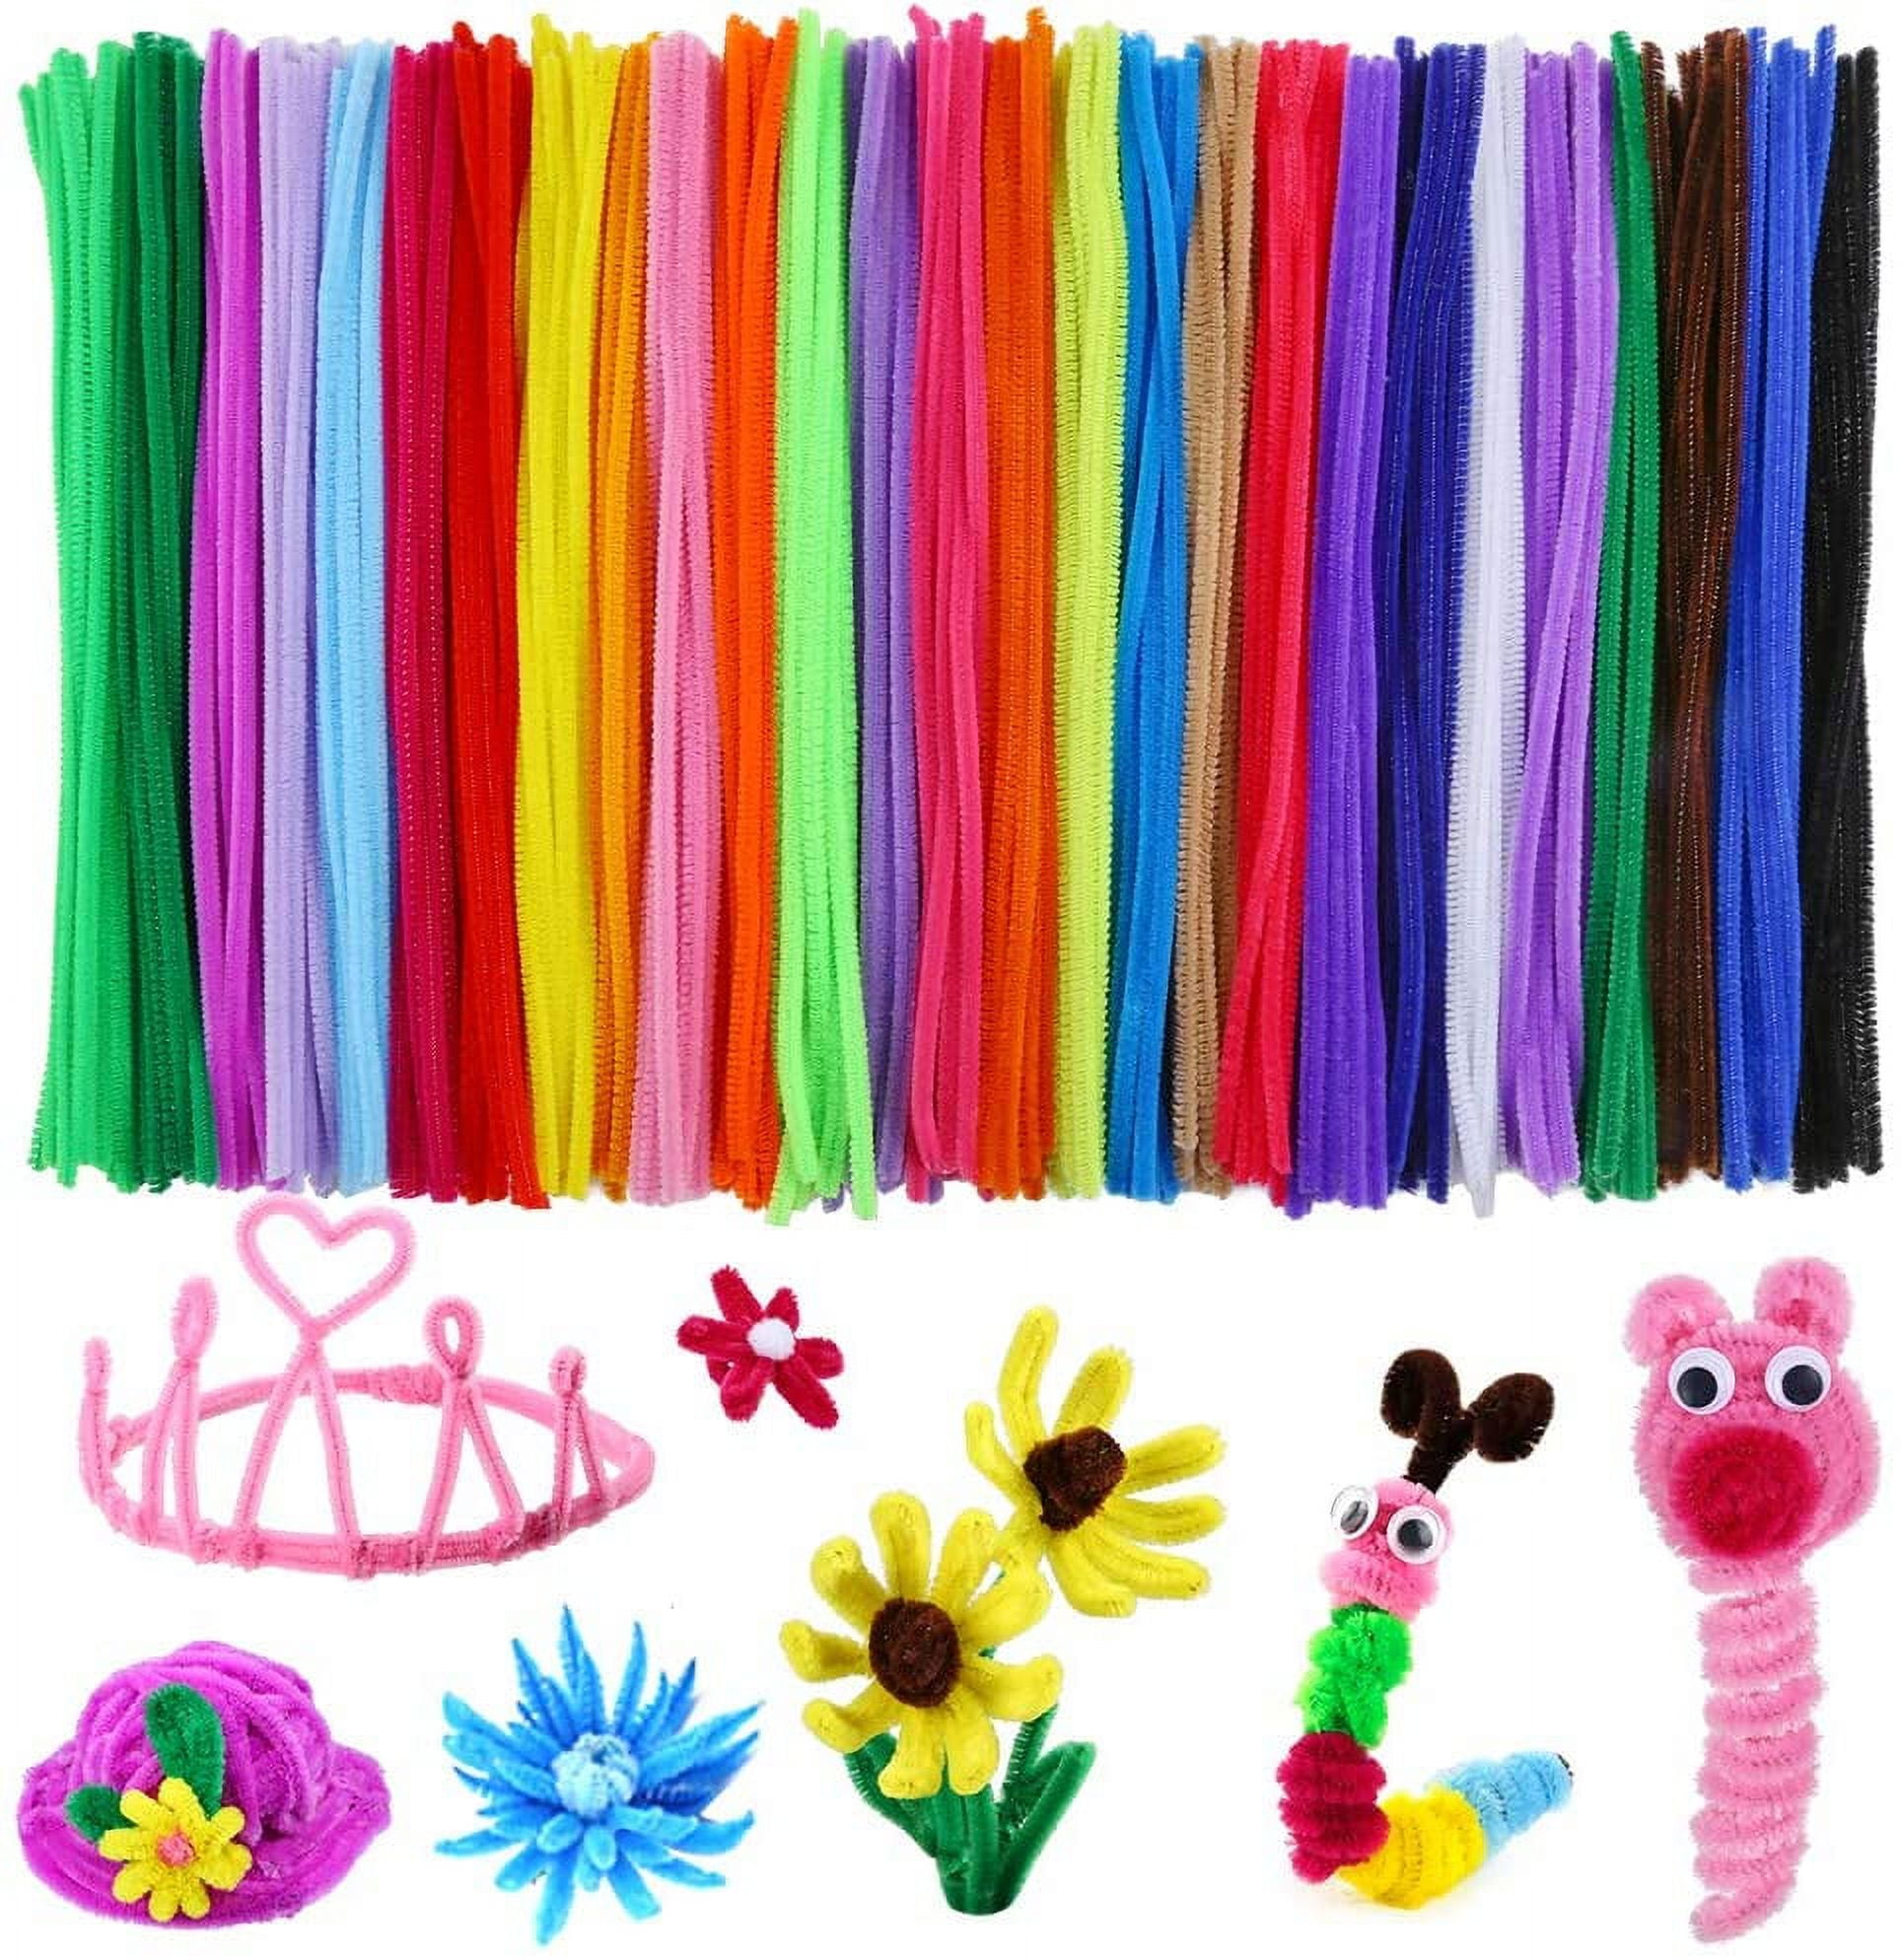 Creativ Pipe Cleaners - Pastel Colours 6mm (24pk) - Highlight Crafts